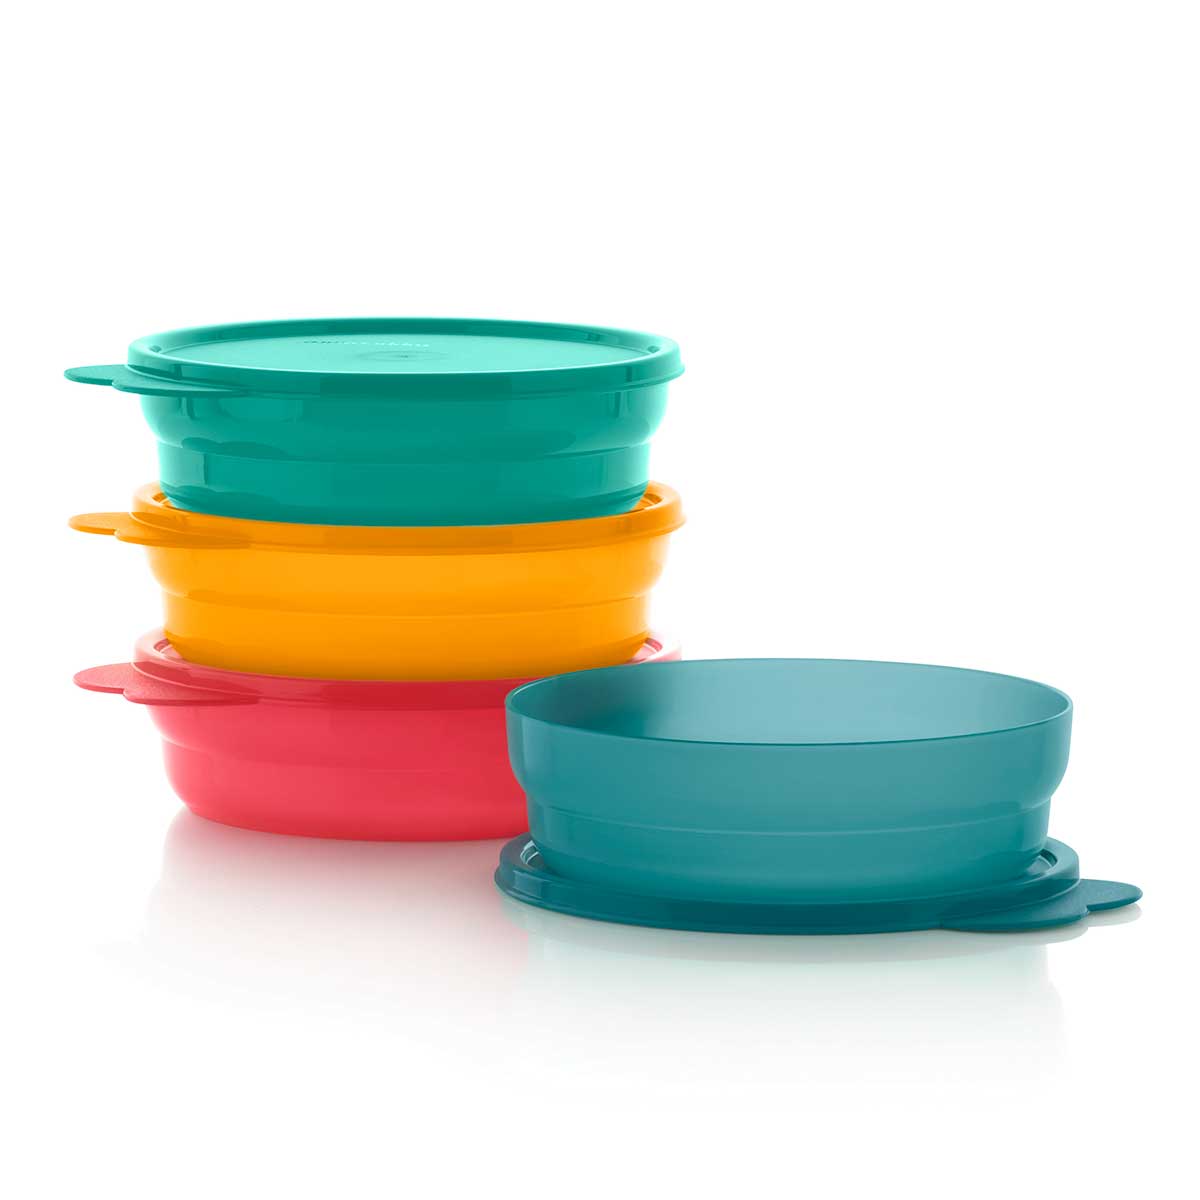 Details about   Brand New TUPPERWARE Set of 4 Wonders Bowls 1½~Cups Cereal Aqua Mint Seals 